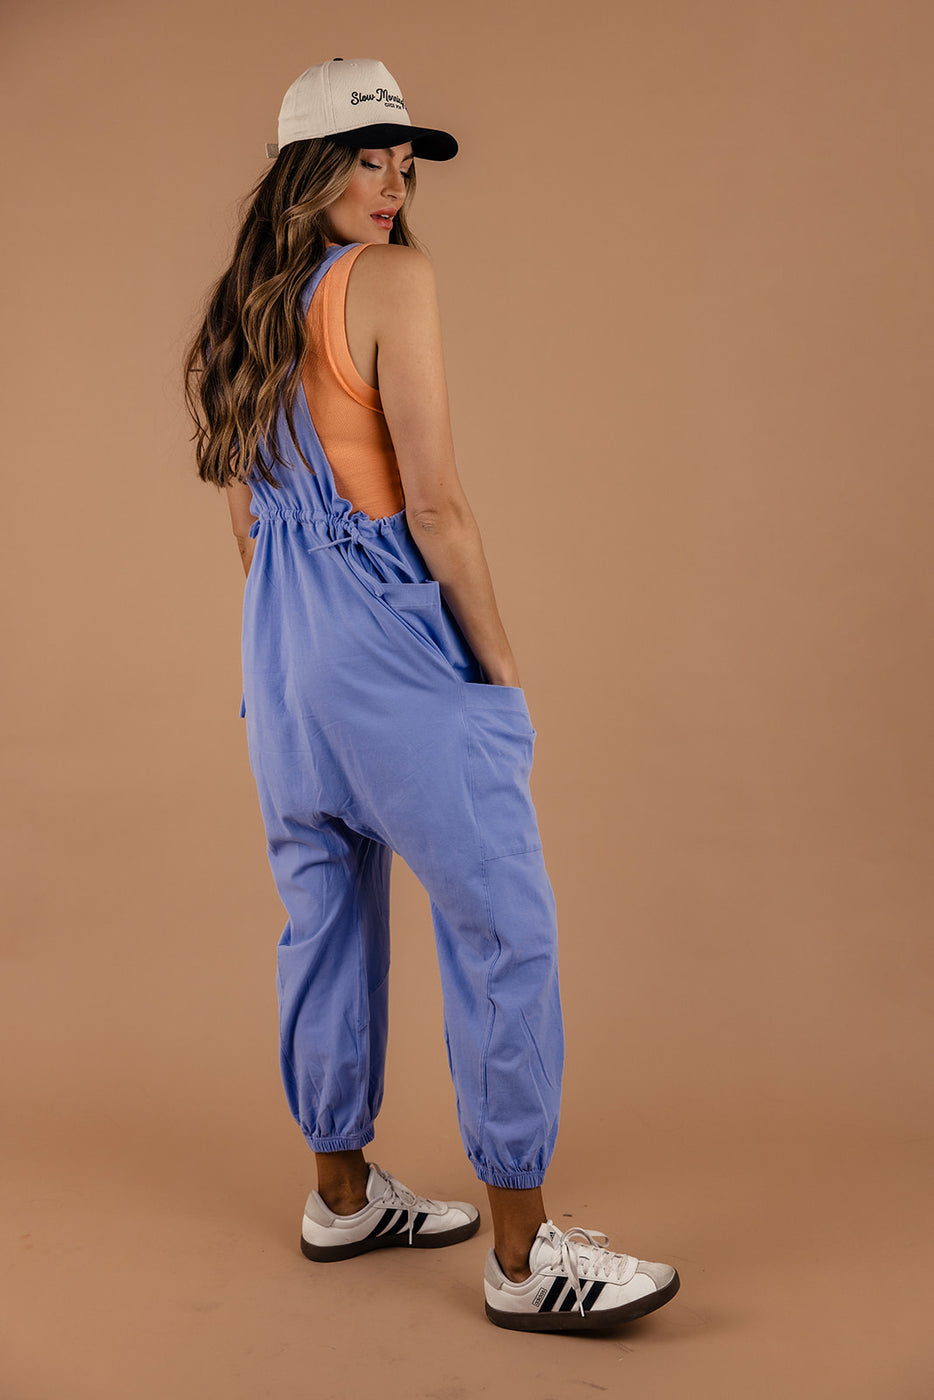 a woman in blue overalls